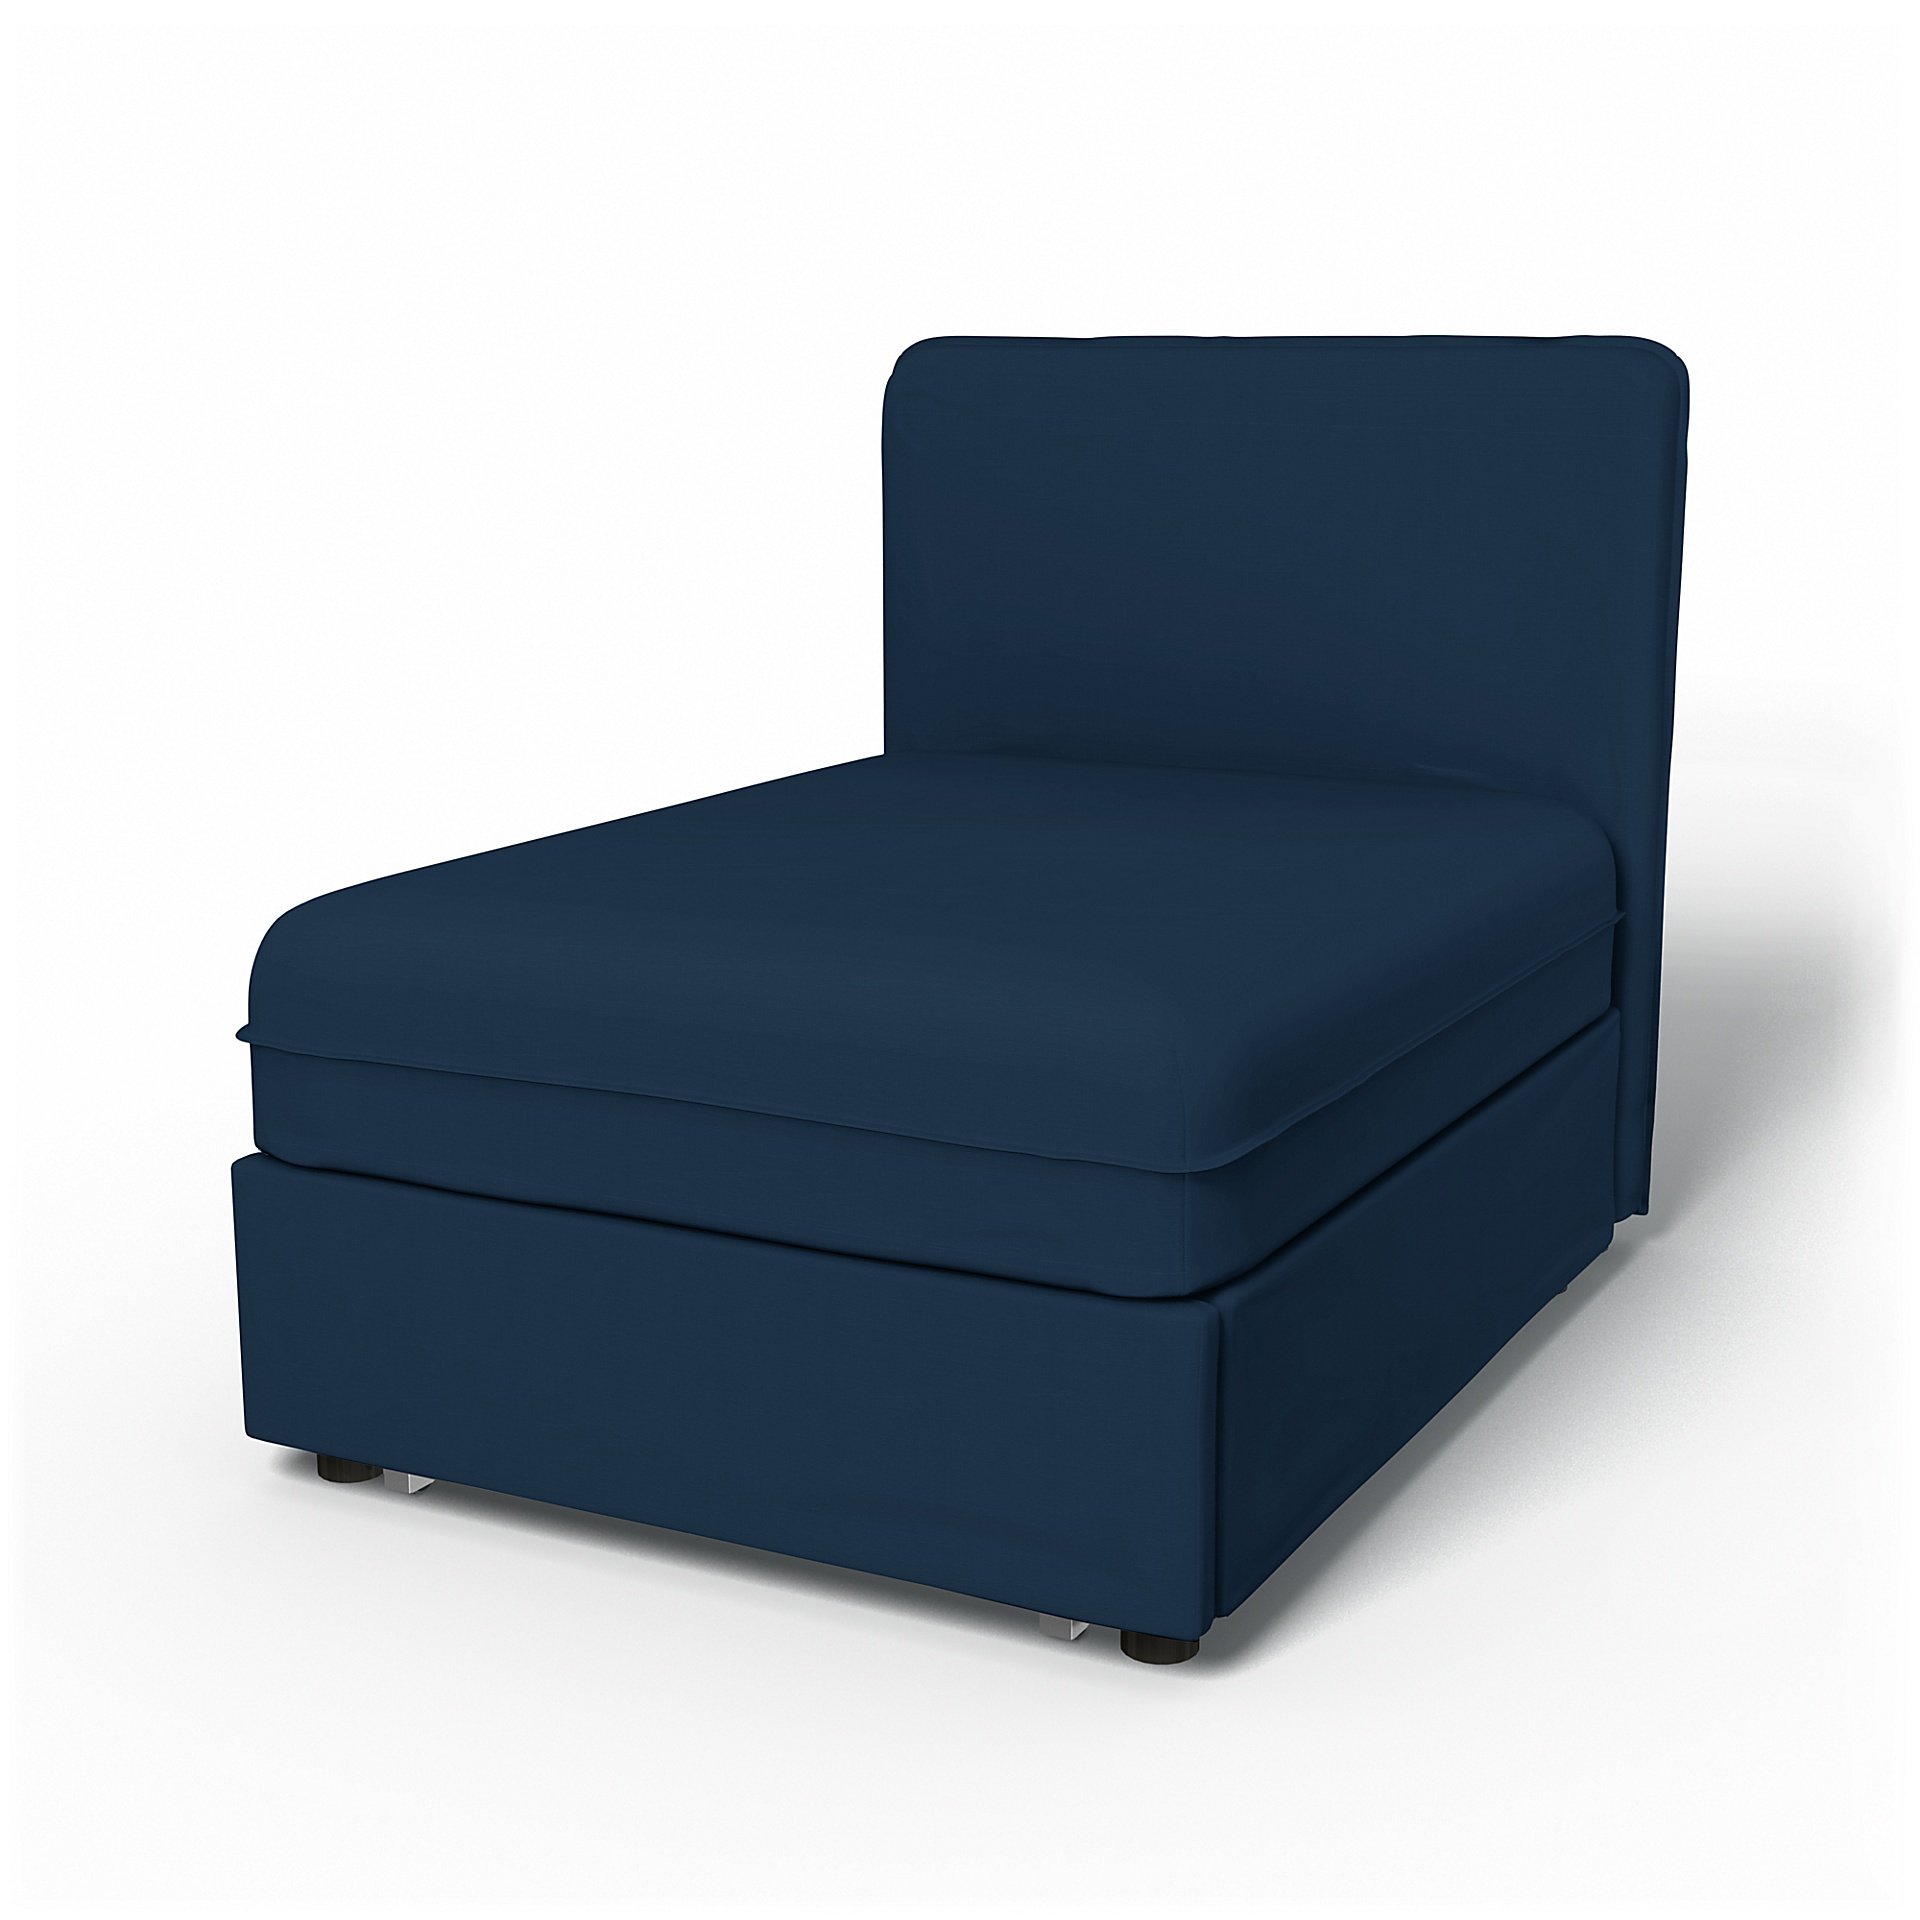 IKEA - Vallentuna Seat Module with Low Back Sofa Bed Cover 80x100 cm 32x39in, Deep Navy Blue, Cotton